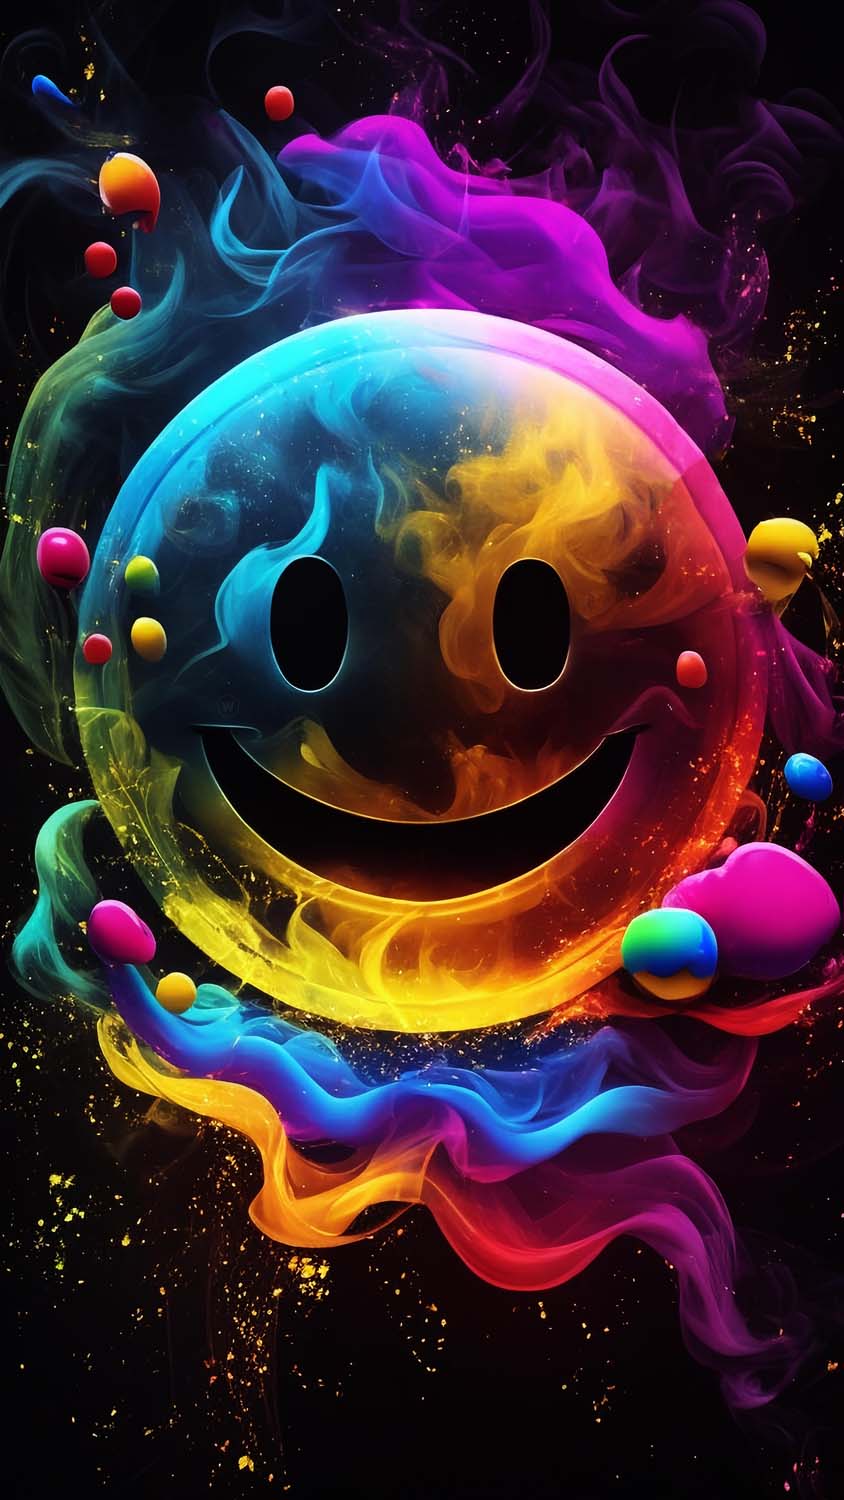 Emoji Wallpaper - You Can Download the Best Emoji Wallpapers for Free.-sgquangbinhtourist.com.vn